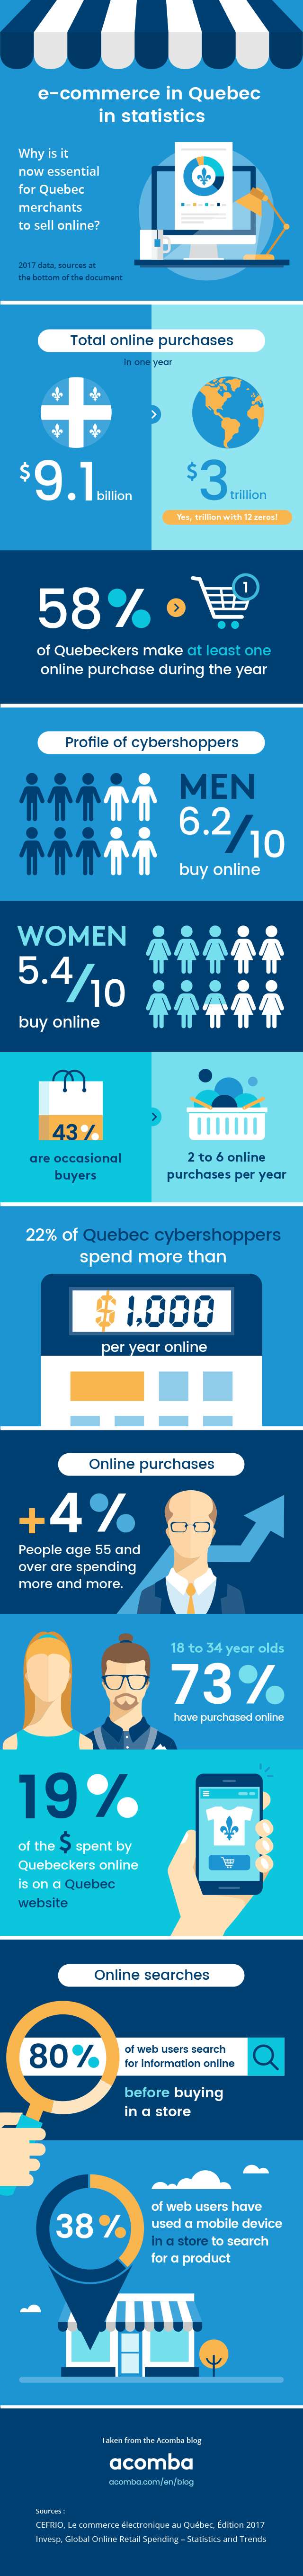 Infographic containing statistics on e-commerce in Quebec.